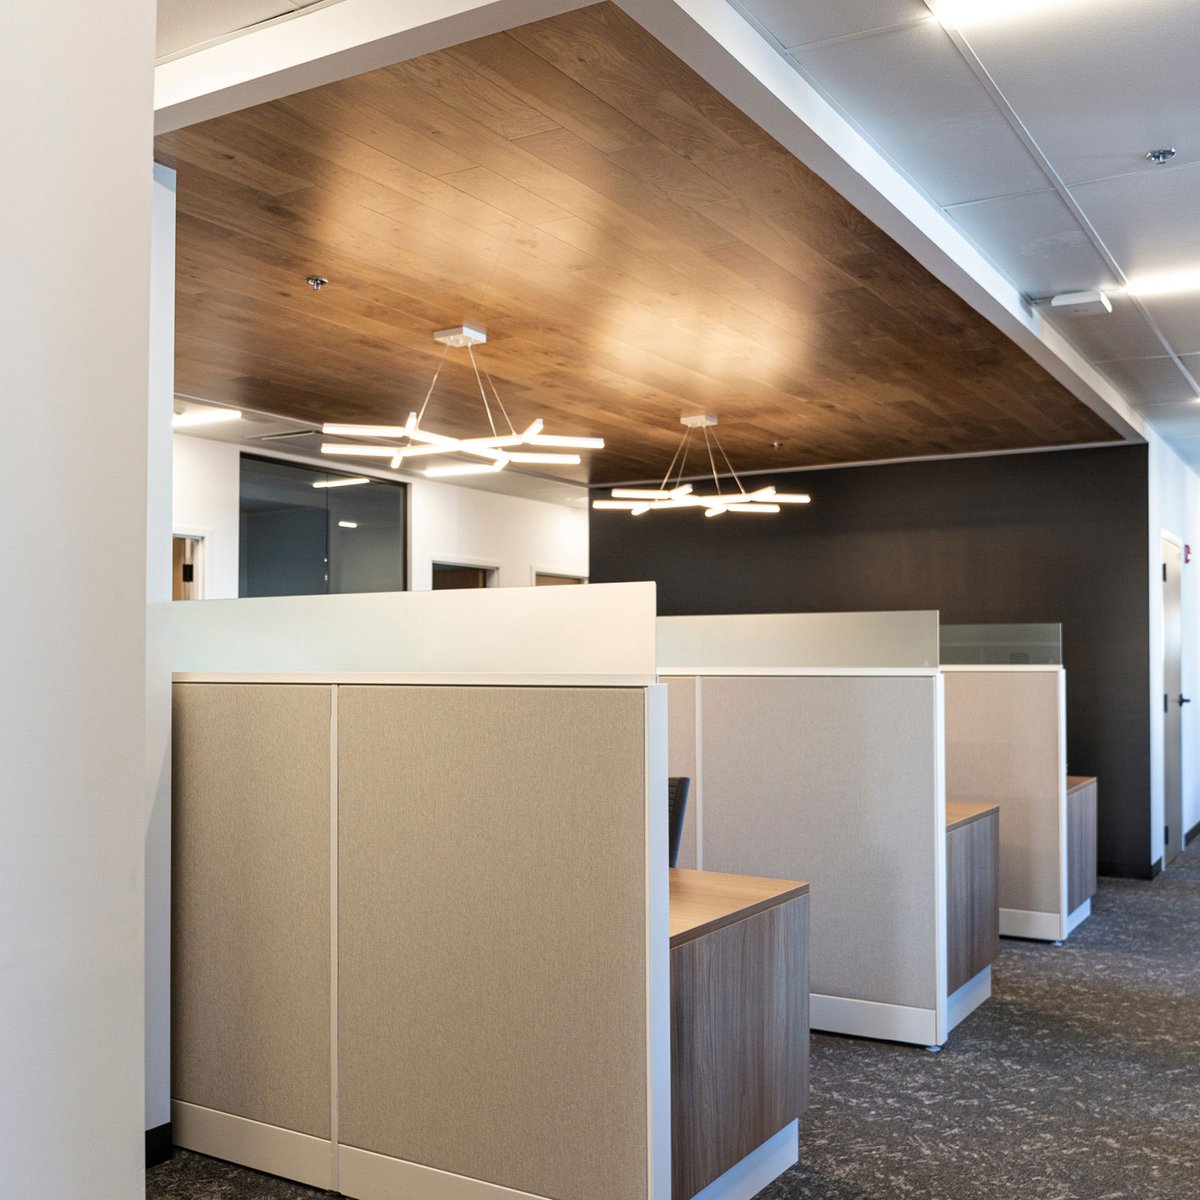 Cubicles with wooden drop ceiling and hanging lights